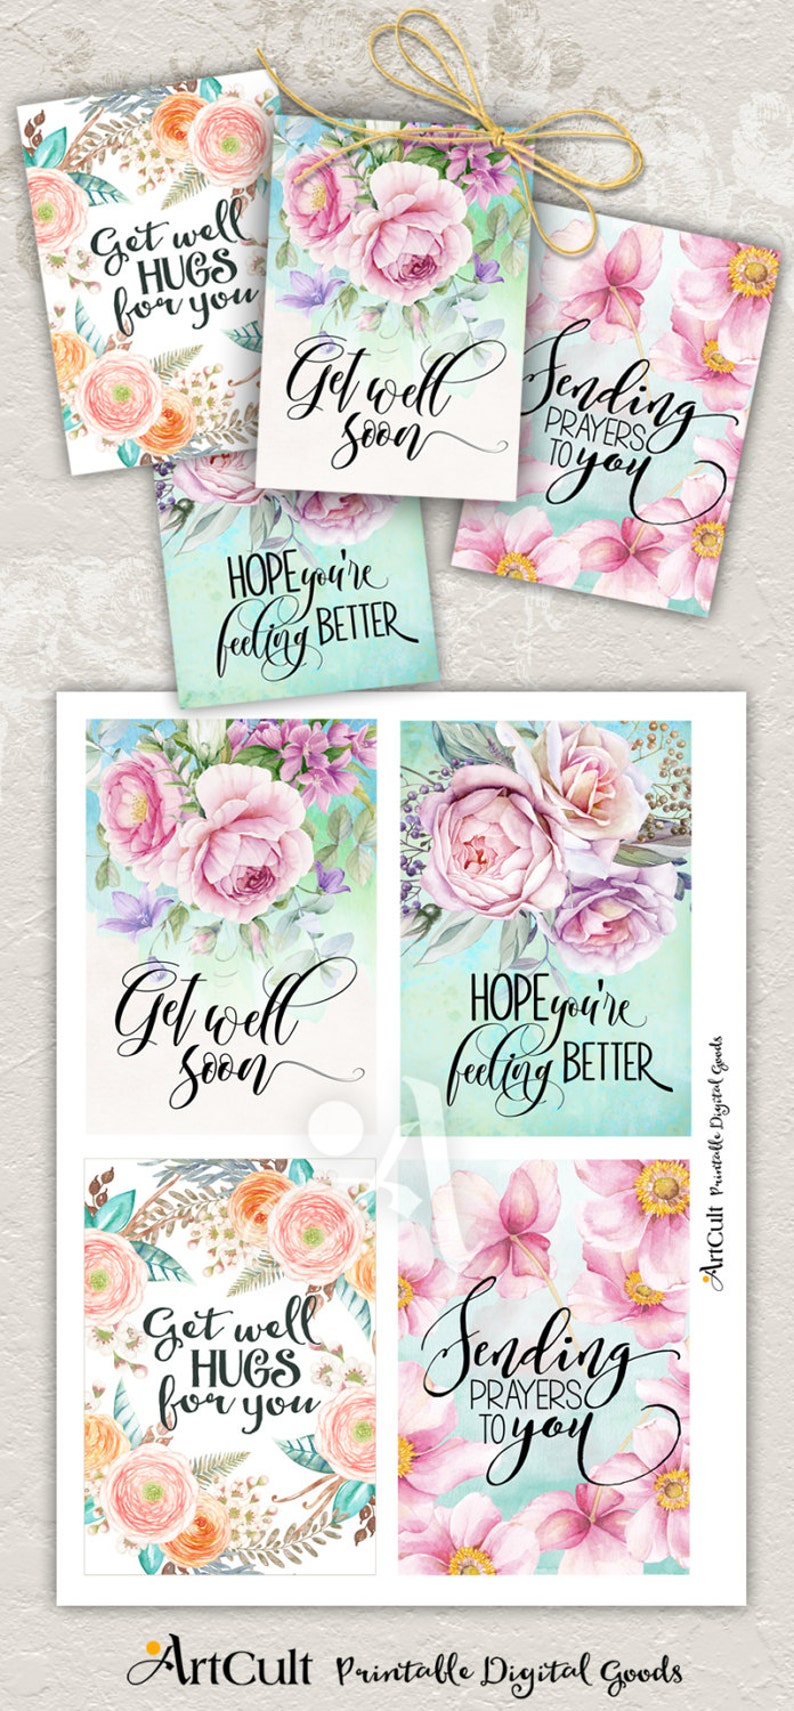 Printable GET WELL CARDS No.2 digital download 3.5x5 size images, hand-painted flowers, typography art, downloadable cards ArtCult designs image 1